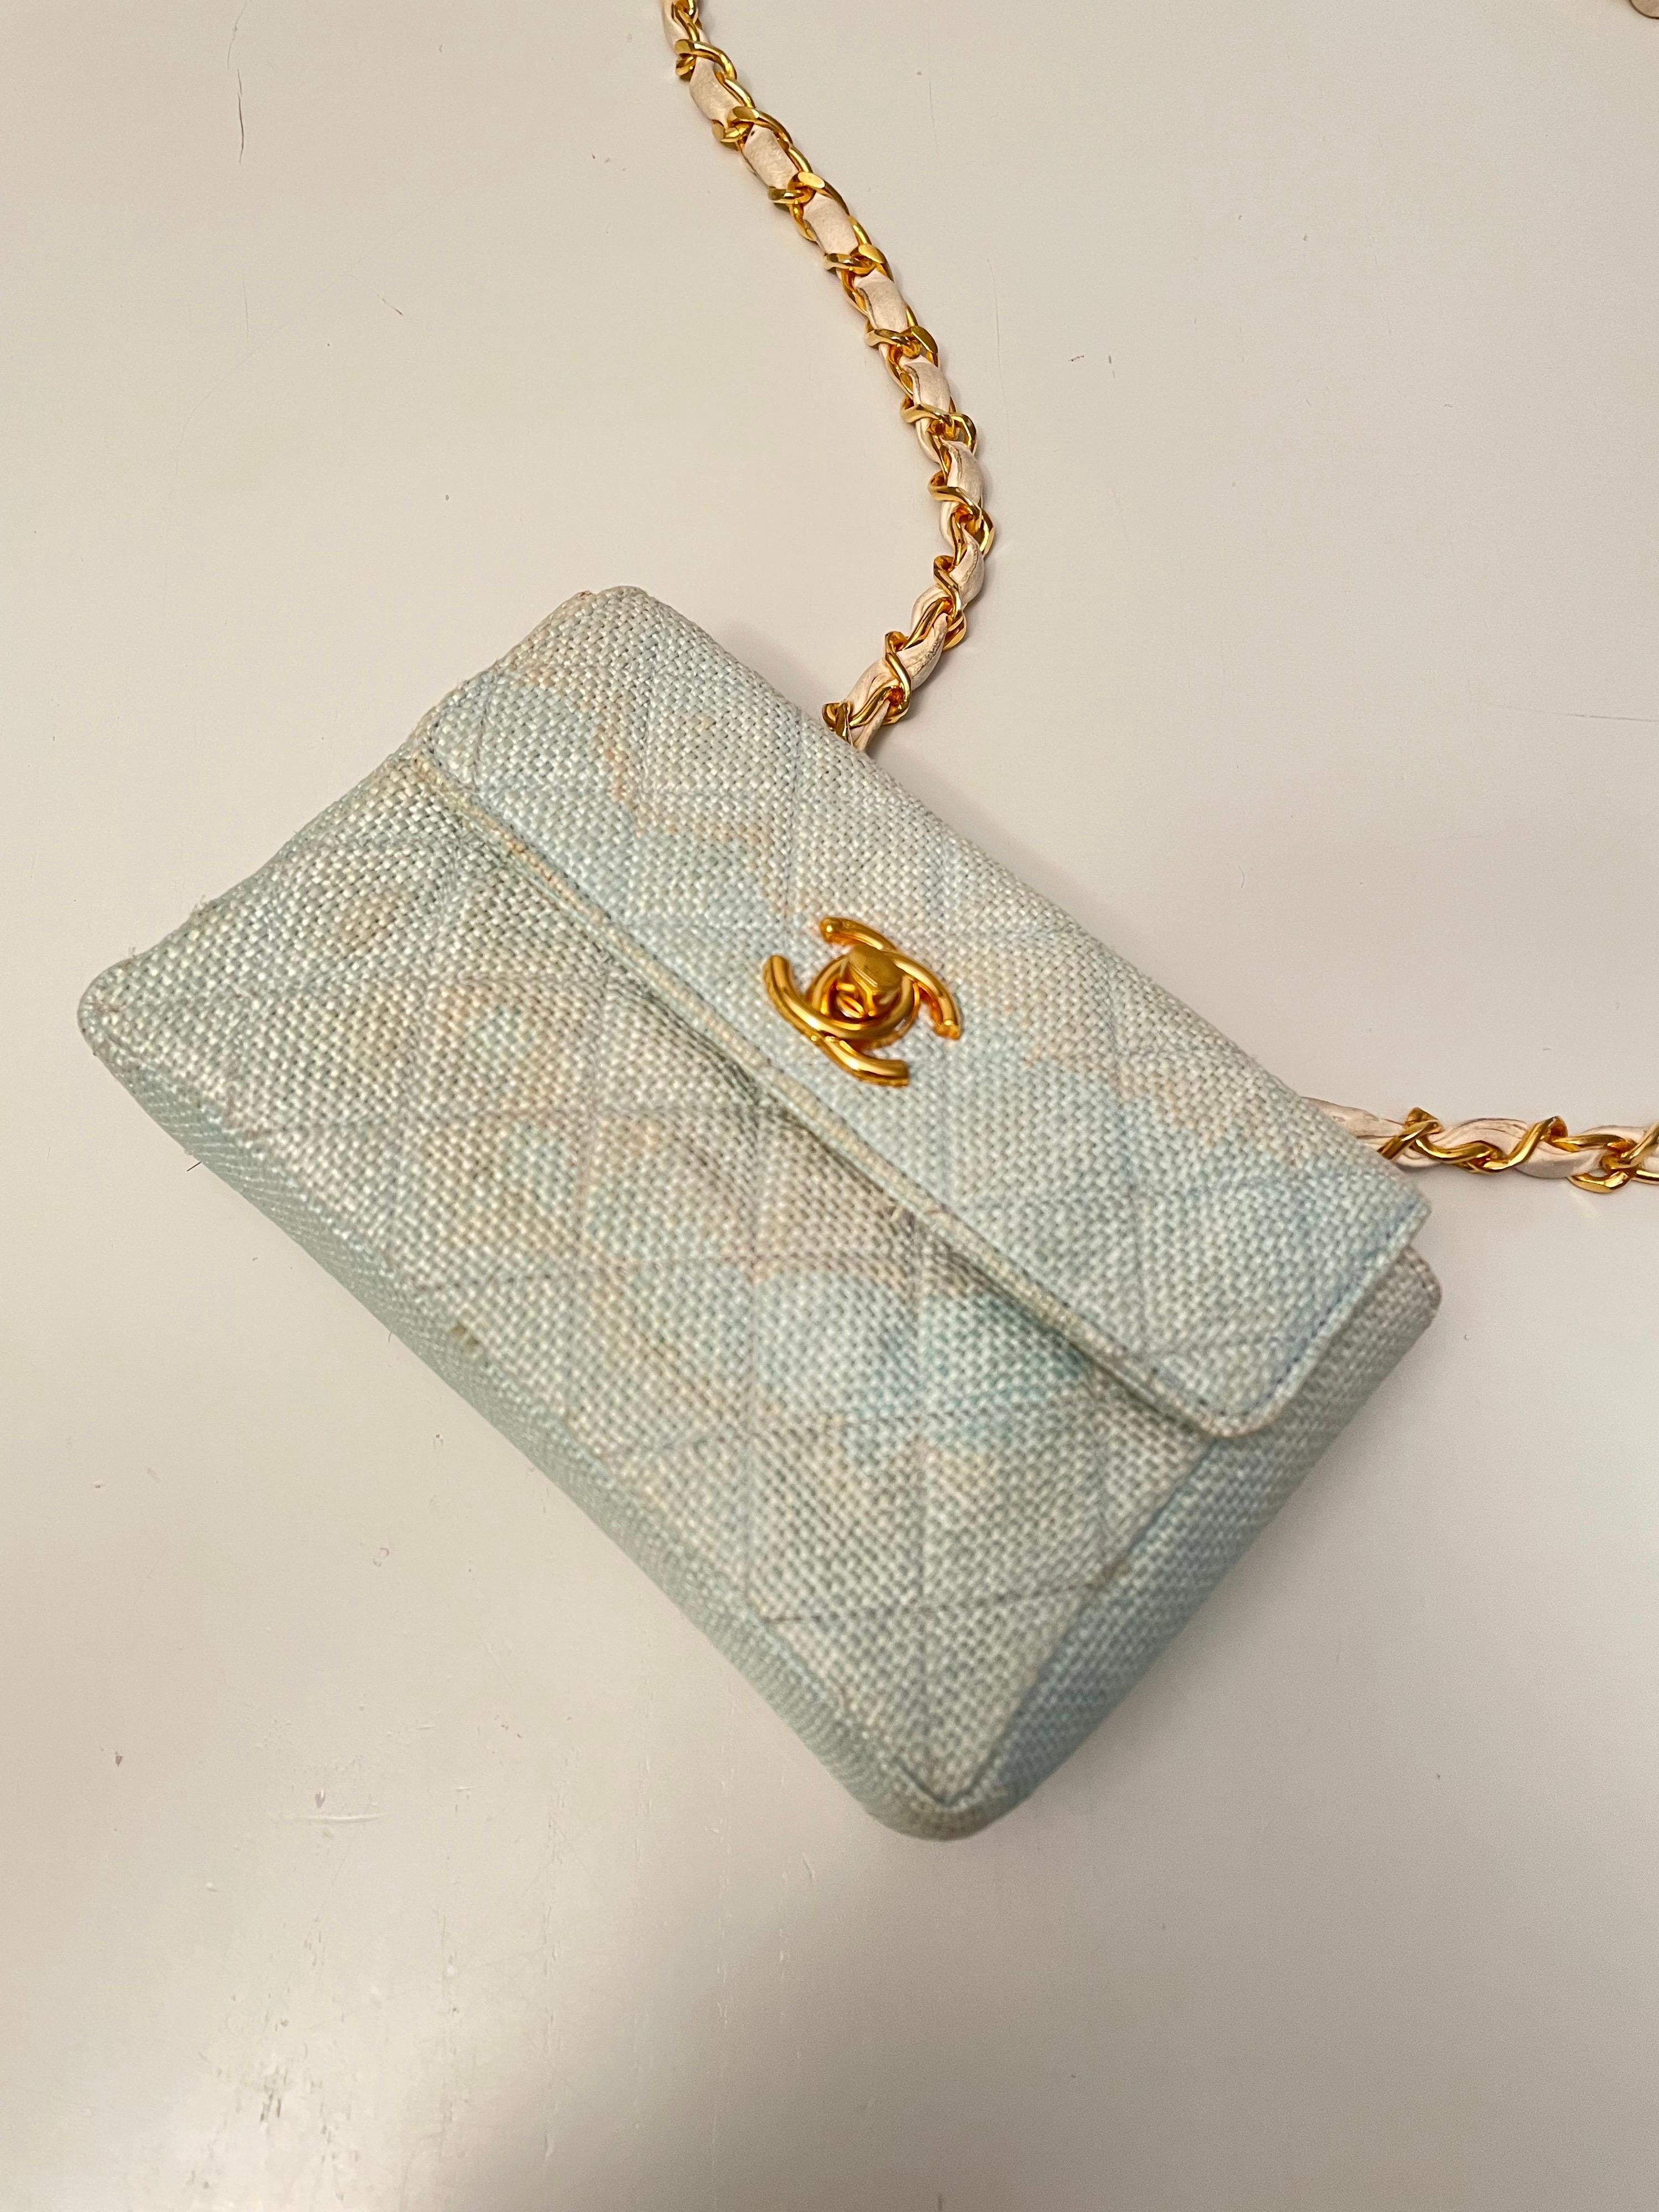 Chanel small bag. 1970 circa.
Featuring light blue canvas and golden hardware. Amazing piece, very fascinating.
It’s been preloved and used a lot. As you can see from the photos the code and “made in France” are vanishing.
It shows some sign of the